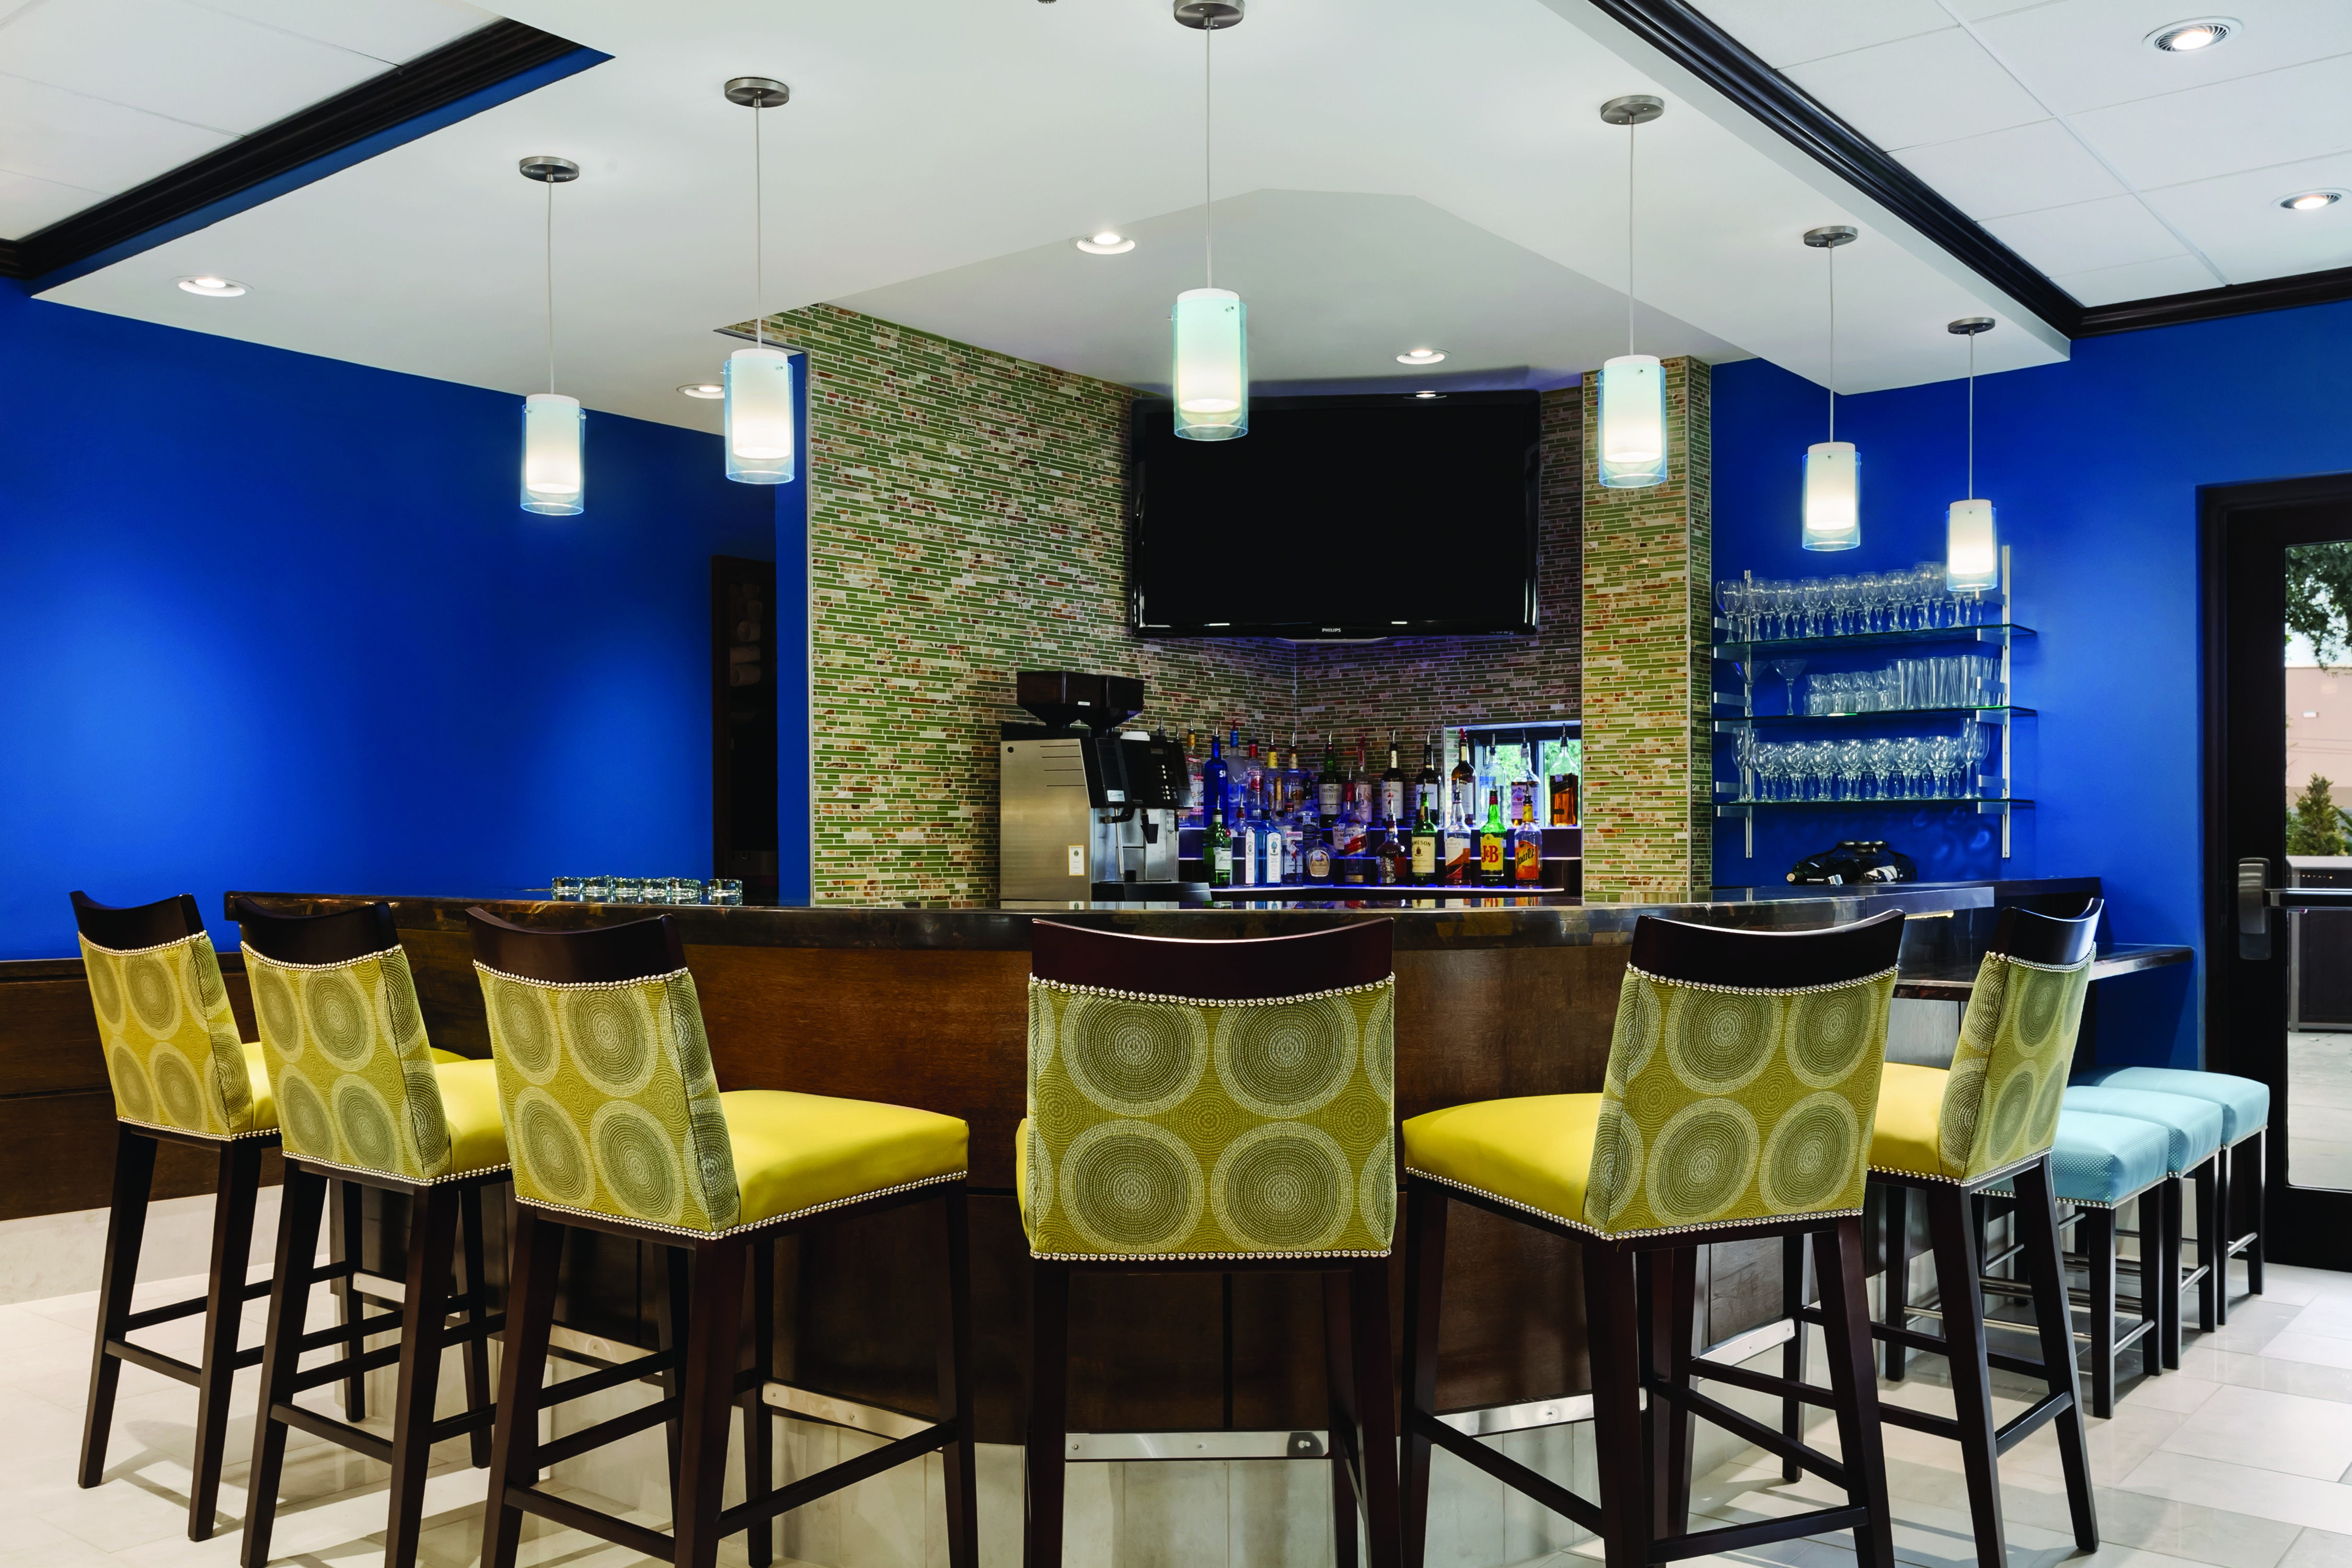 TV Above Fully Stocked Bar With Six Yellow Bar Chairs, and Three Blue Stools